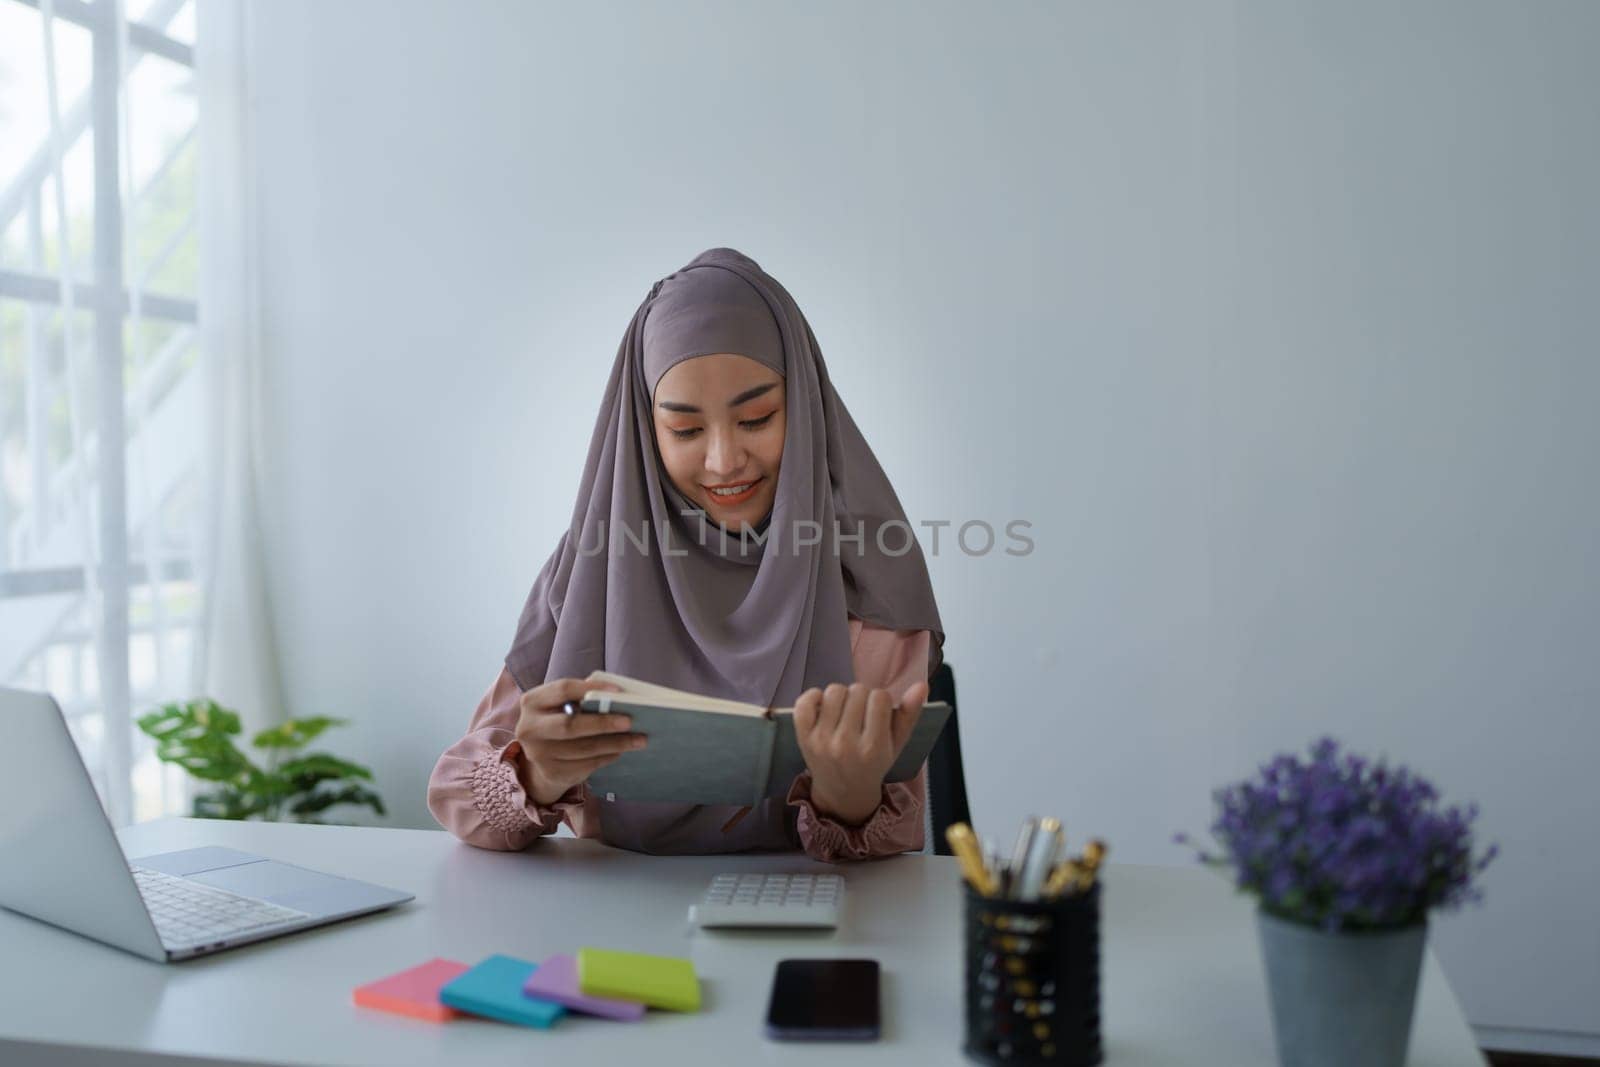 financial, Planning, Marketing and Accounting, portrait of Muslim woman employee checking financial statements using documents and calculators at work by Manastrong